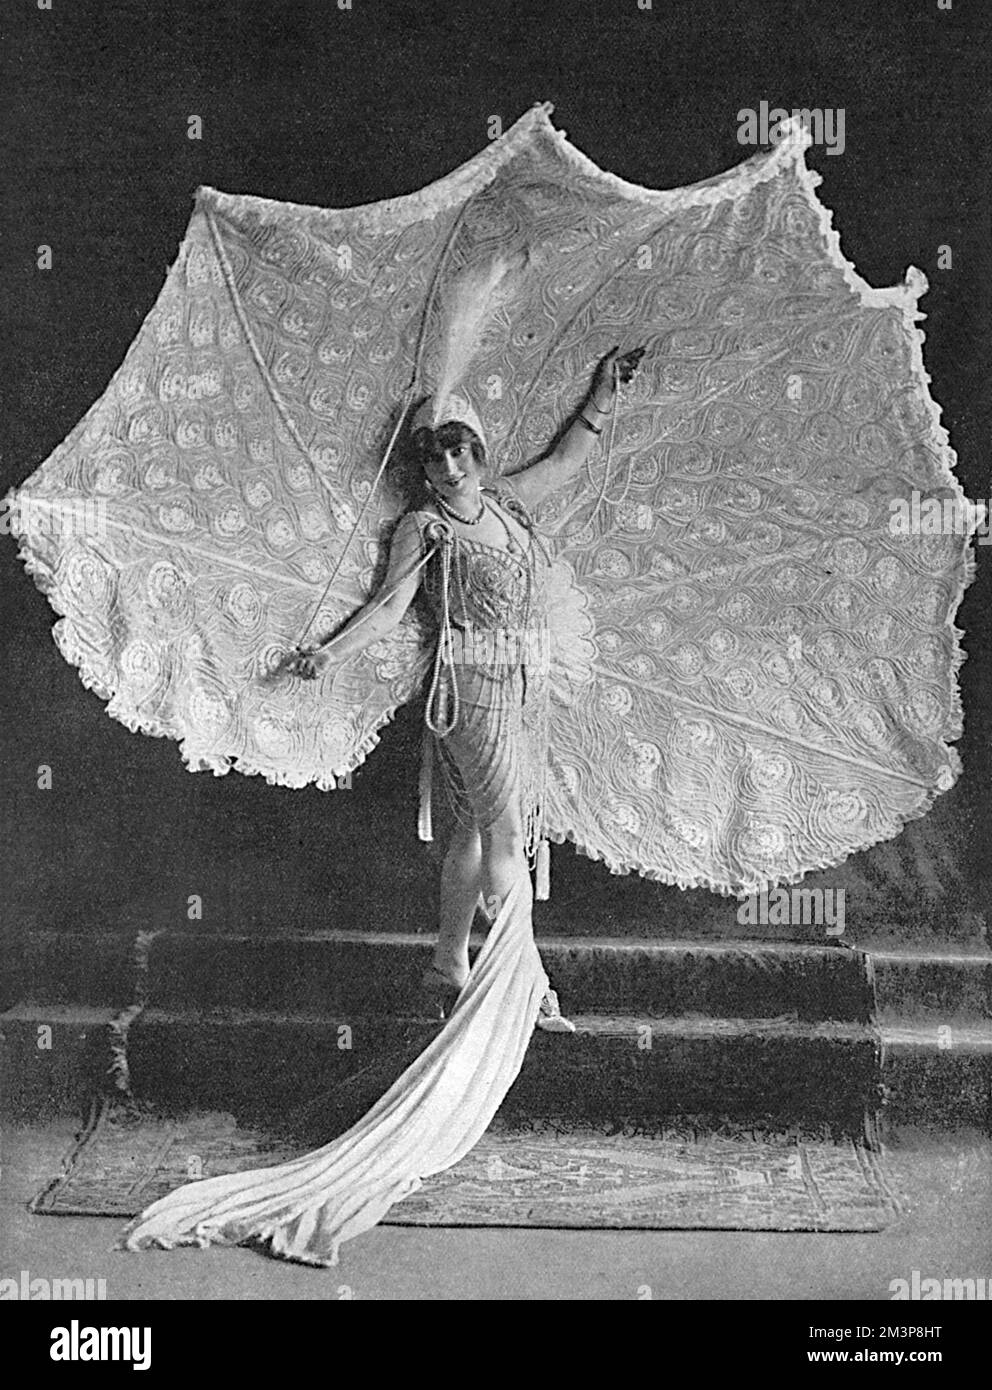 Miss Anna Held, appearing in 'Follow Me' at the Casino in New York, displaying her spectacular peacock gown with the 'tail spread'.       Date: 1917 Stock Photo